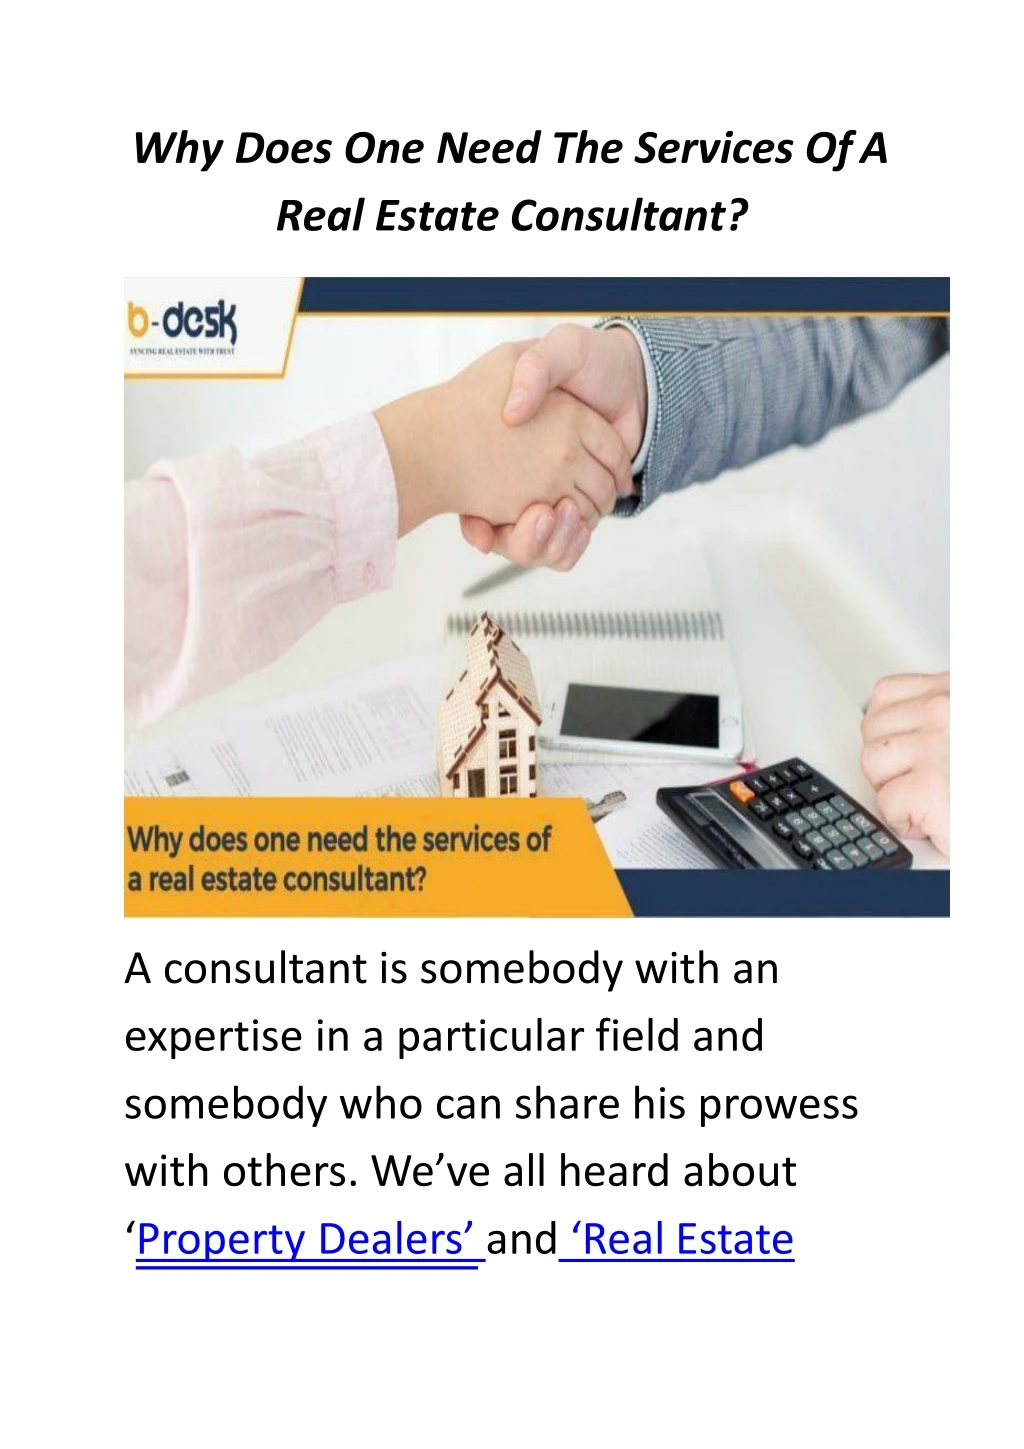 why does one need the services of a real estate consultant